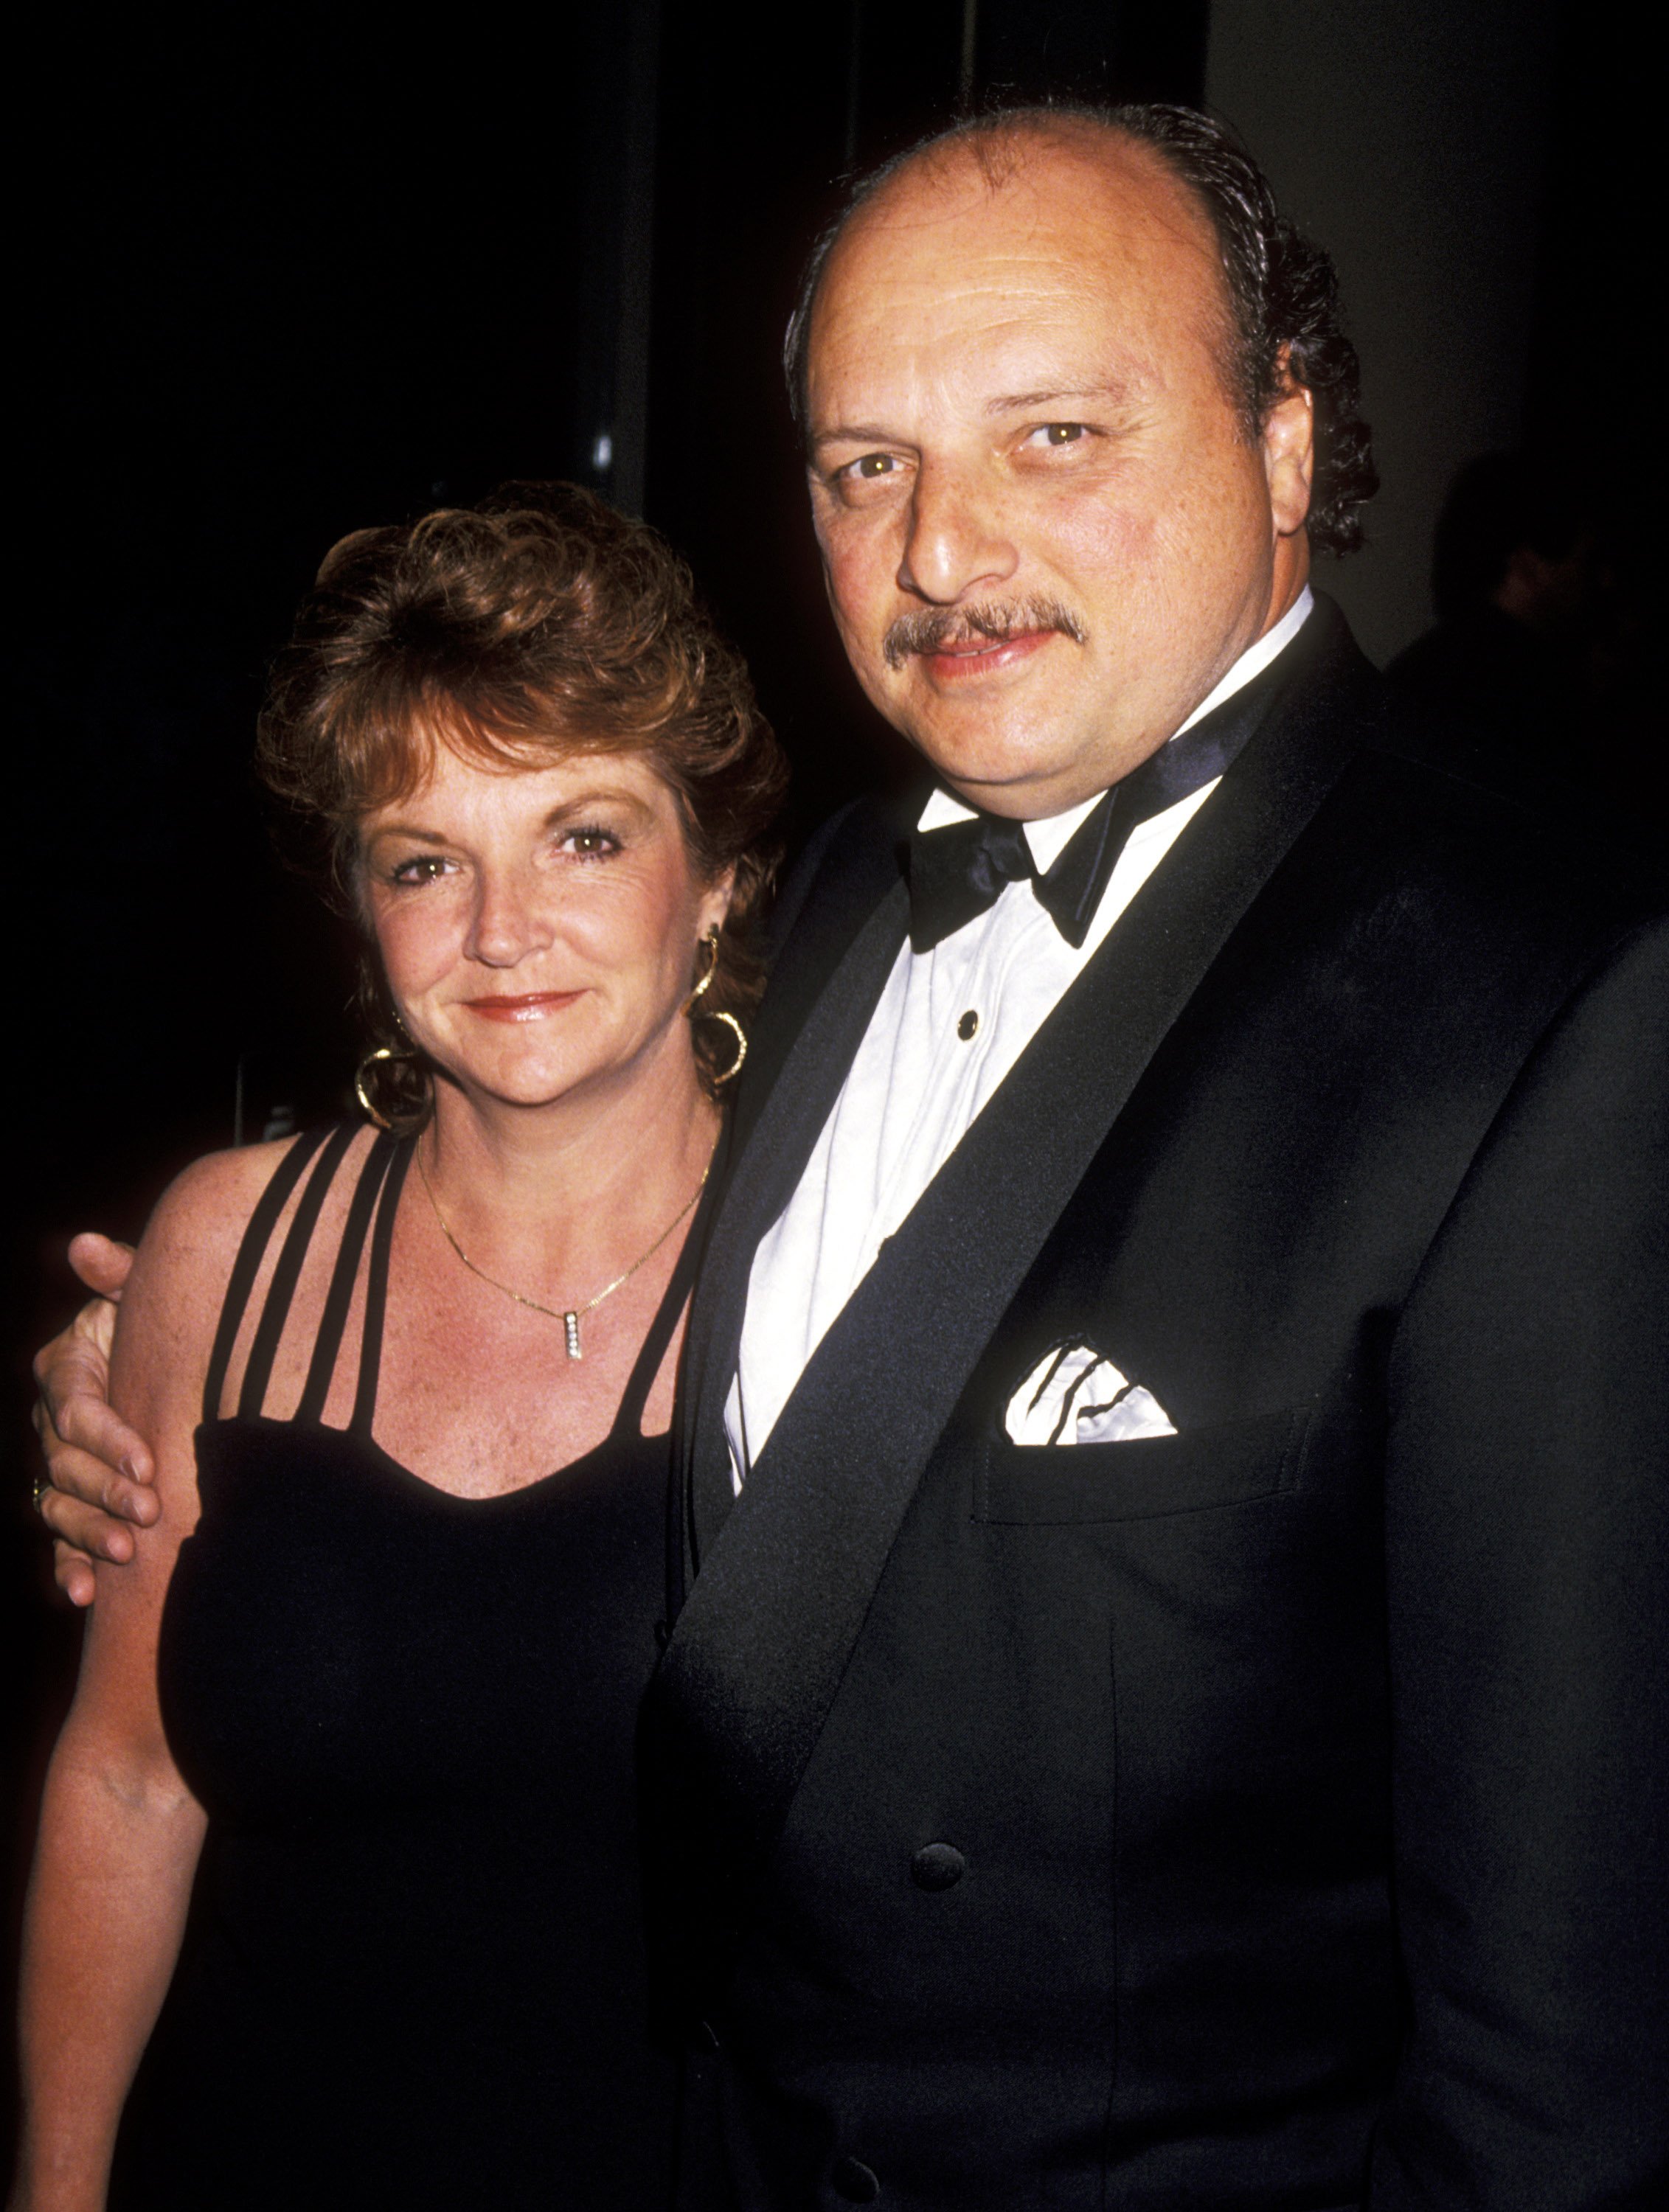 Nypd Blue S Dennis Franz Was Furious When He Found His Love It Took Him 13 Years To Wed Her